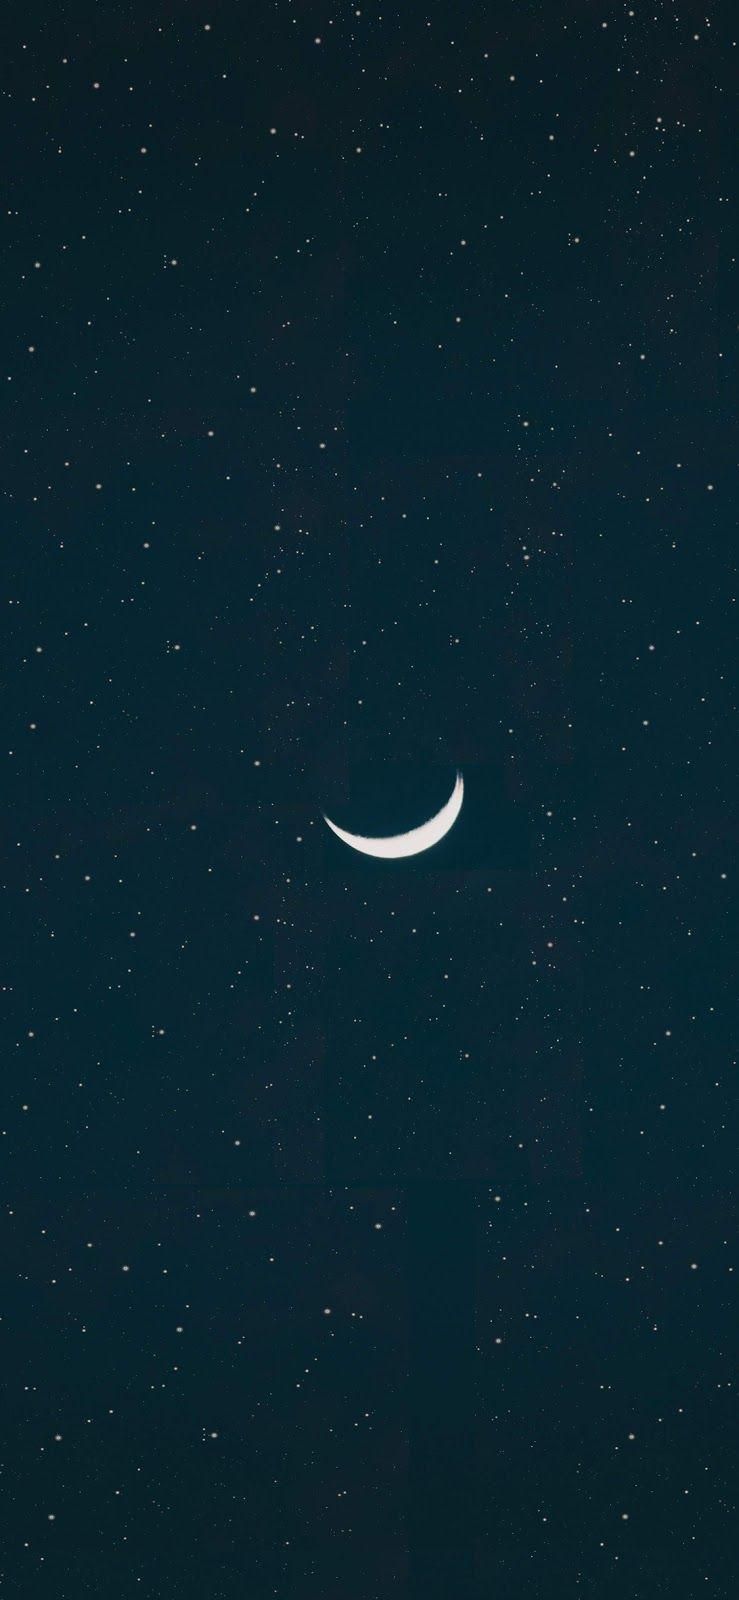 A crescent moon and stars wallpaper for your phone - Moon